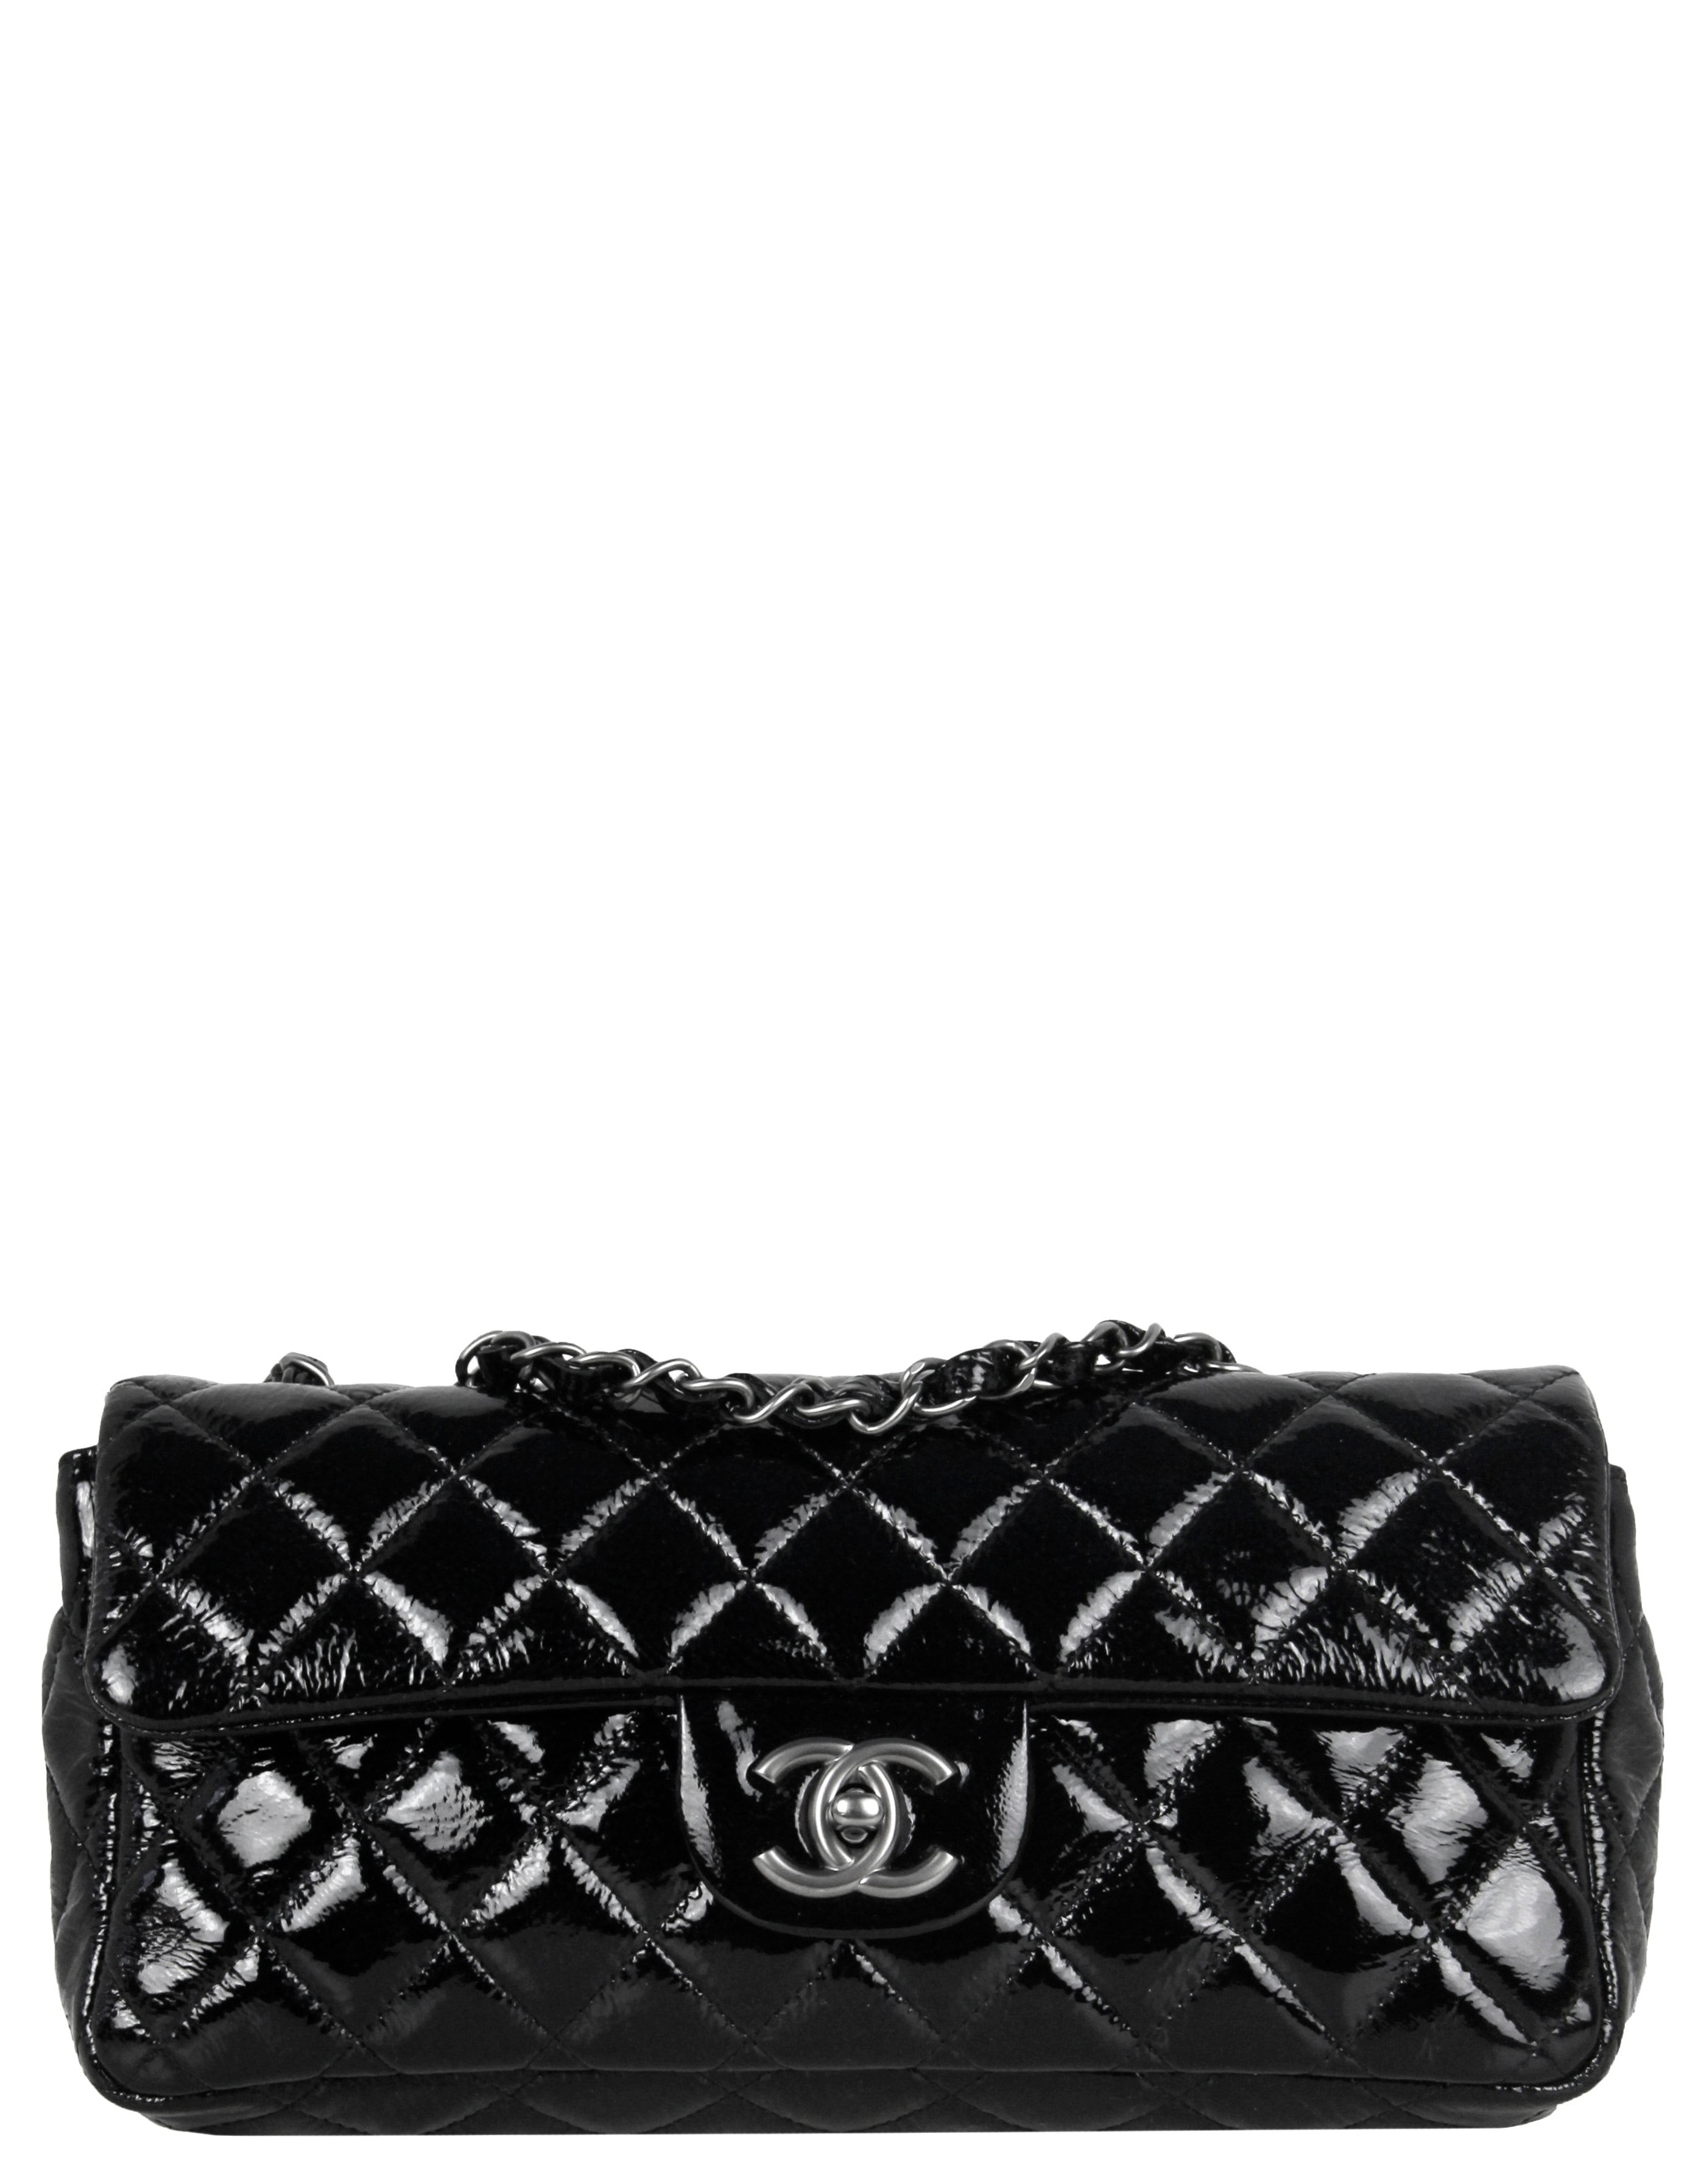 Chanel Black Distressed Patent Quilted East West Flap Bag